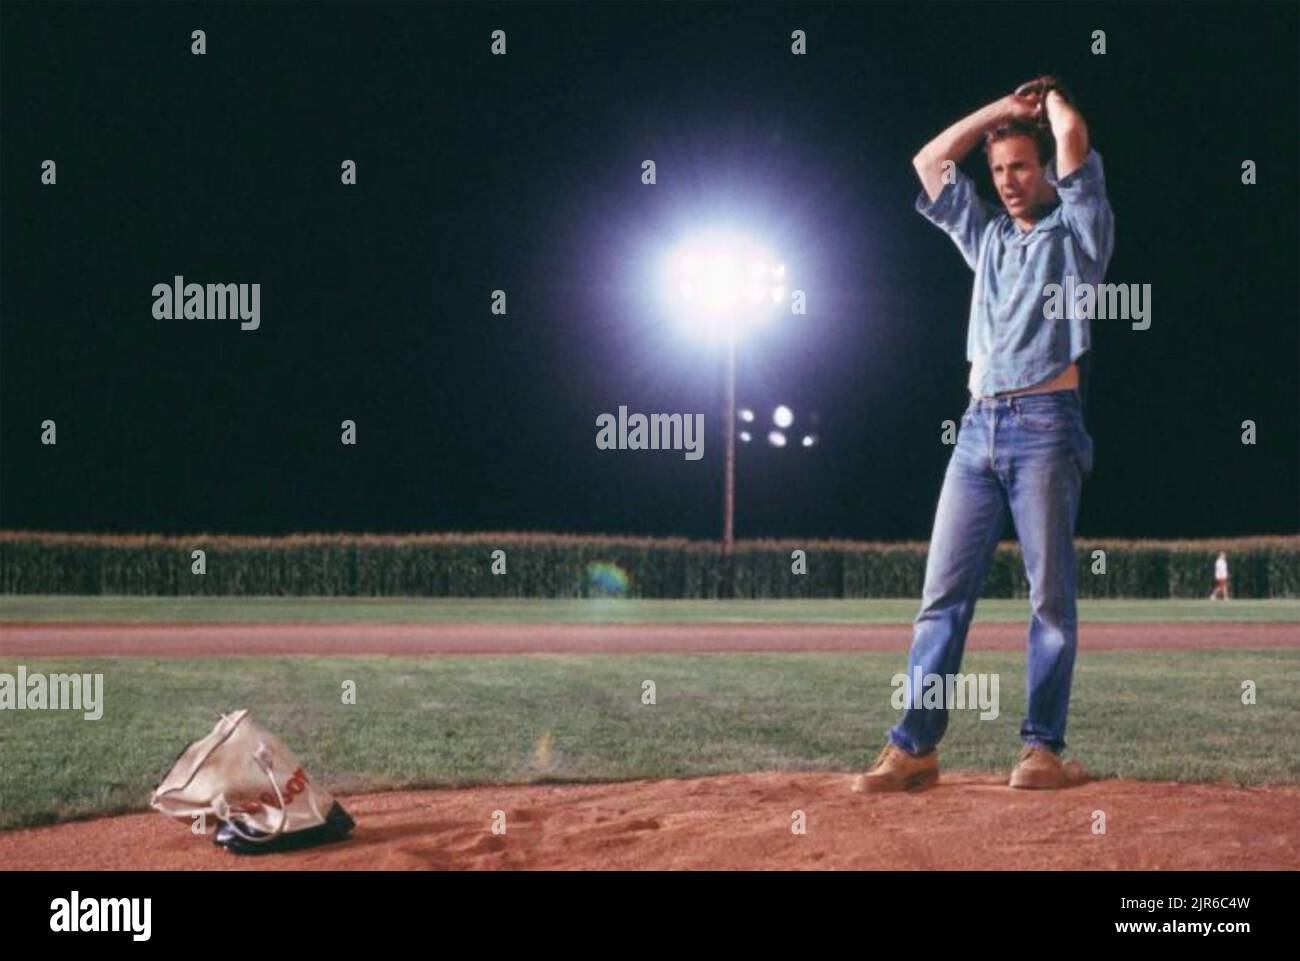 FIELD OF DREAMS 1999 Universal Picturs Film mit Kevin Costner Stockfoto